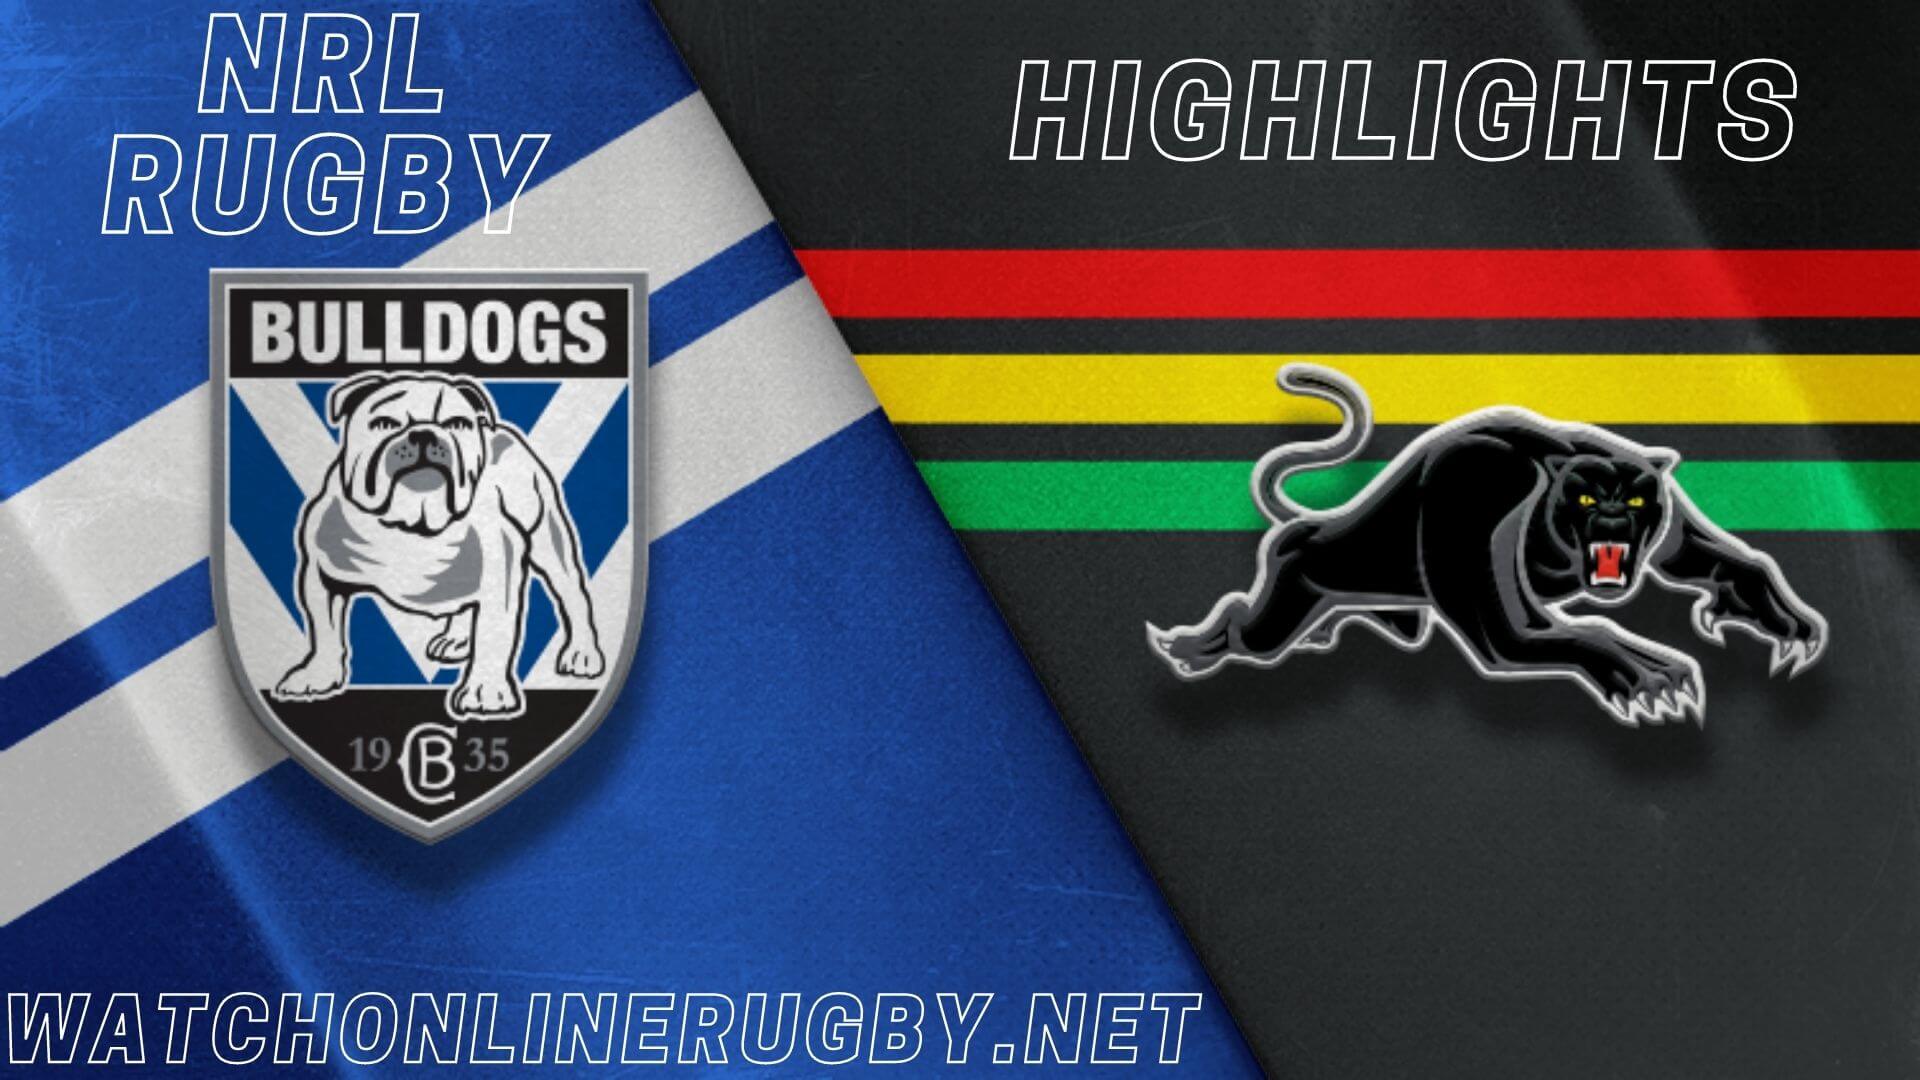 Bulldogs Vs Panthers Highlights RD 5 NRL Rugby